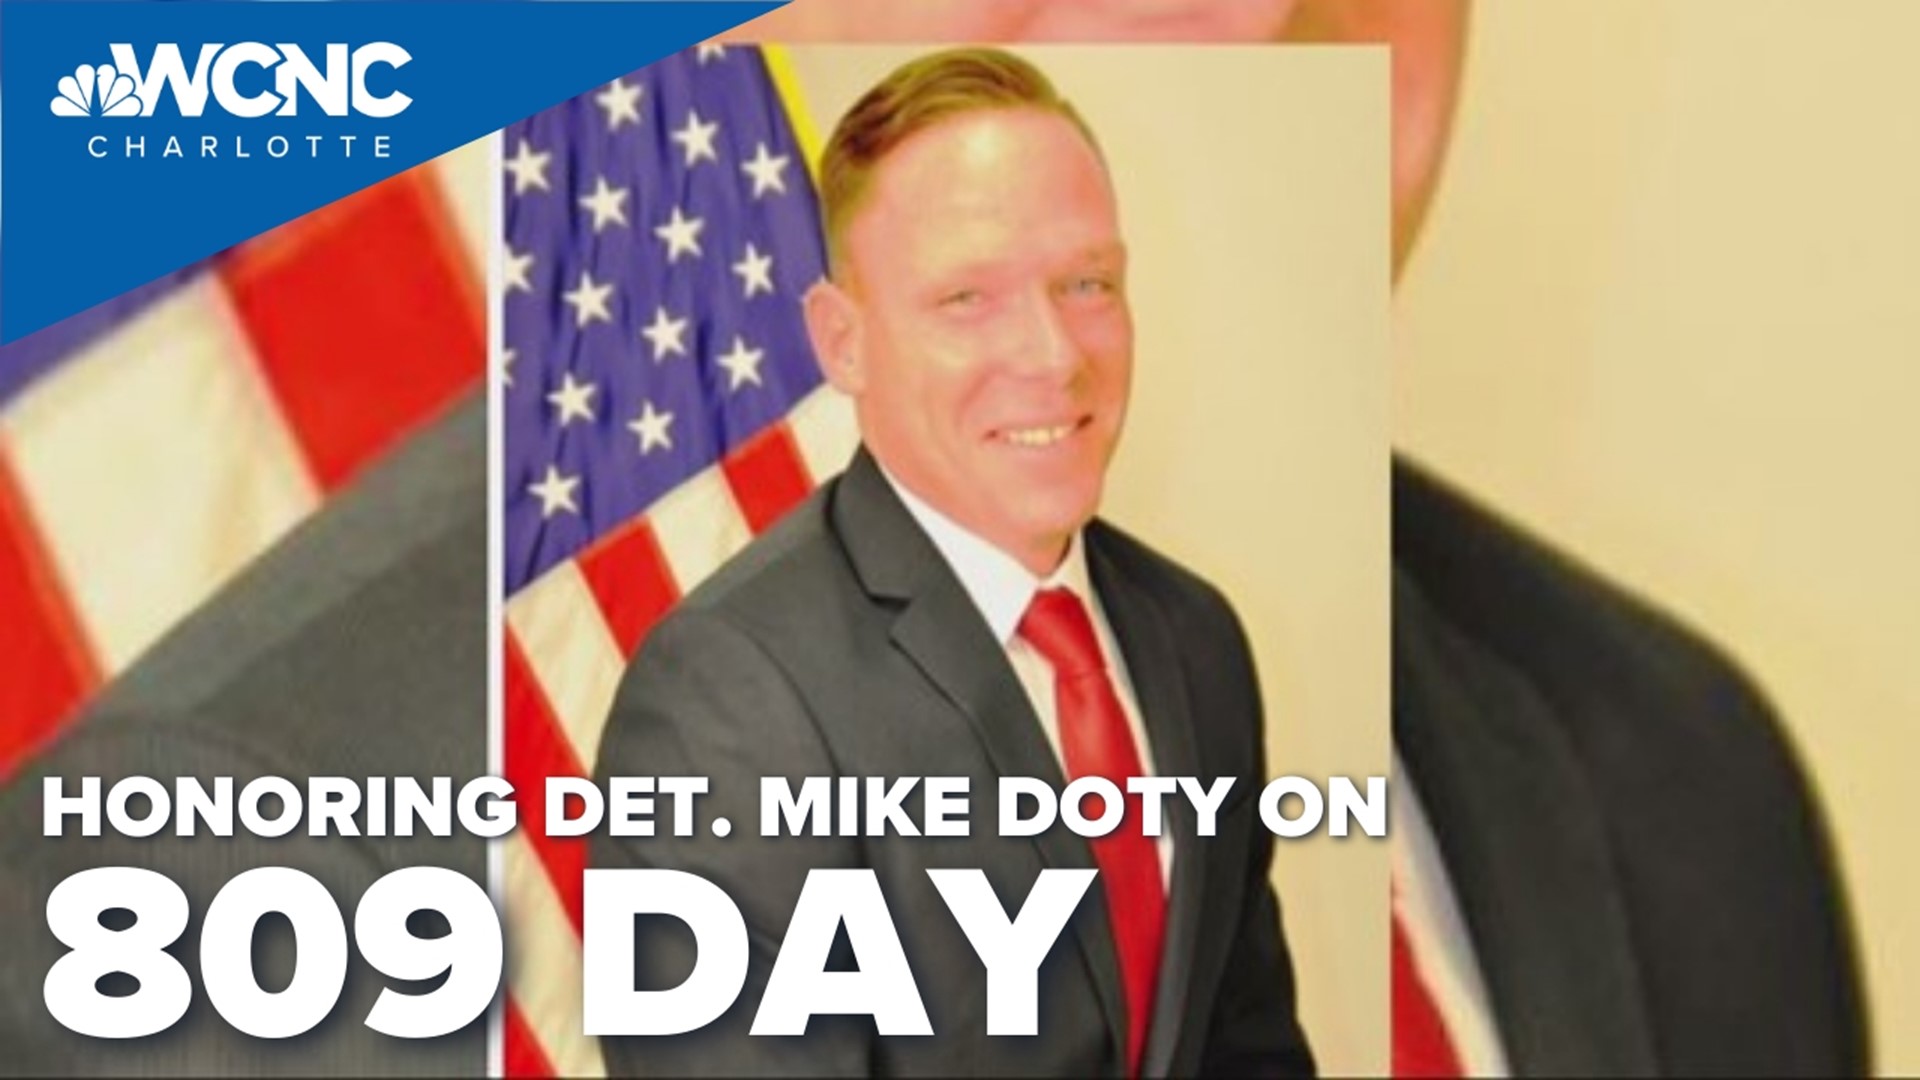 A former detective, Mike Doty, is being honored by York County Sheriff's Office.